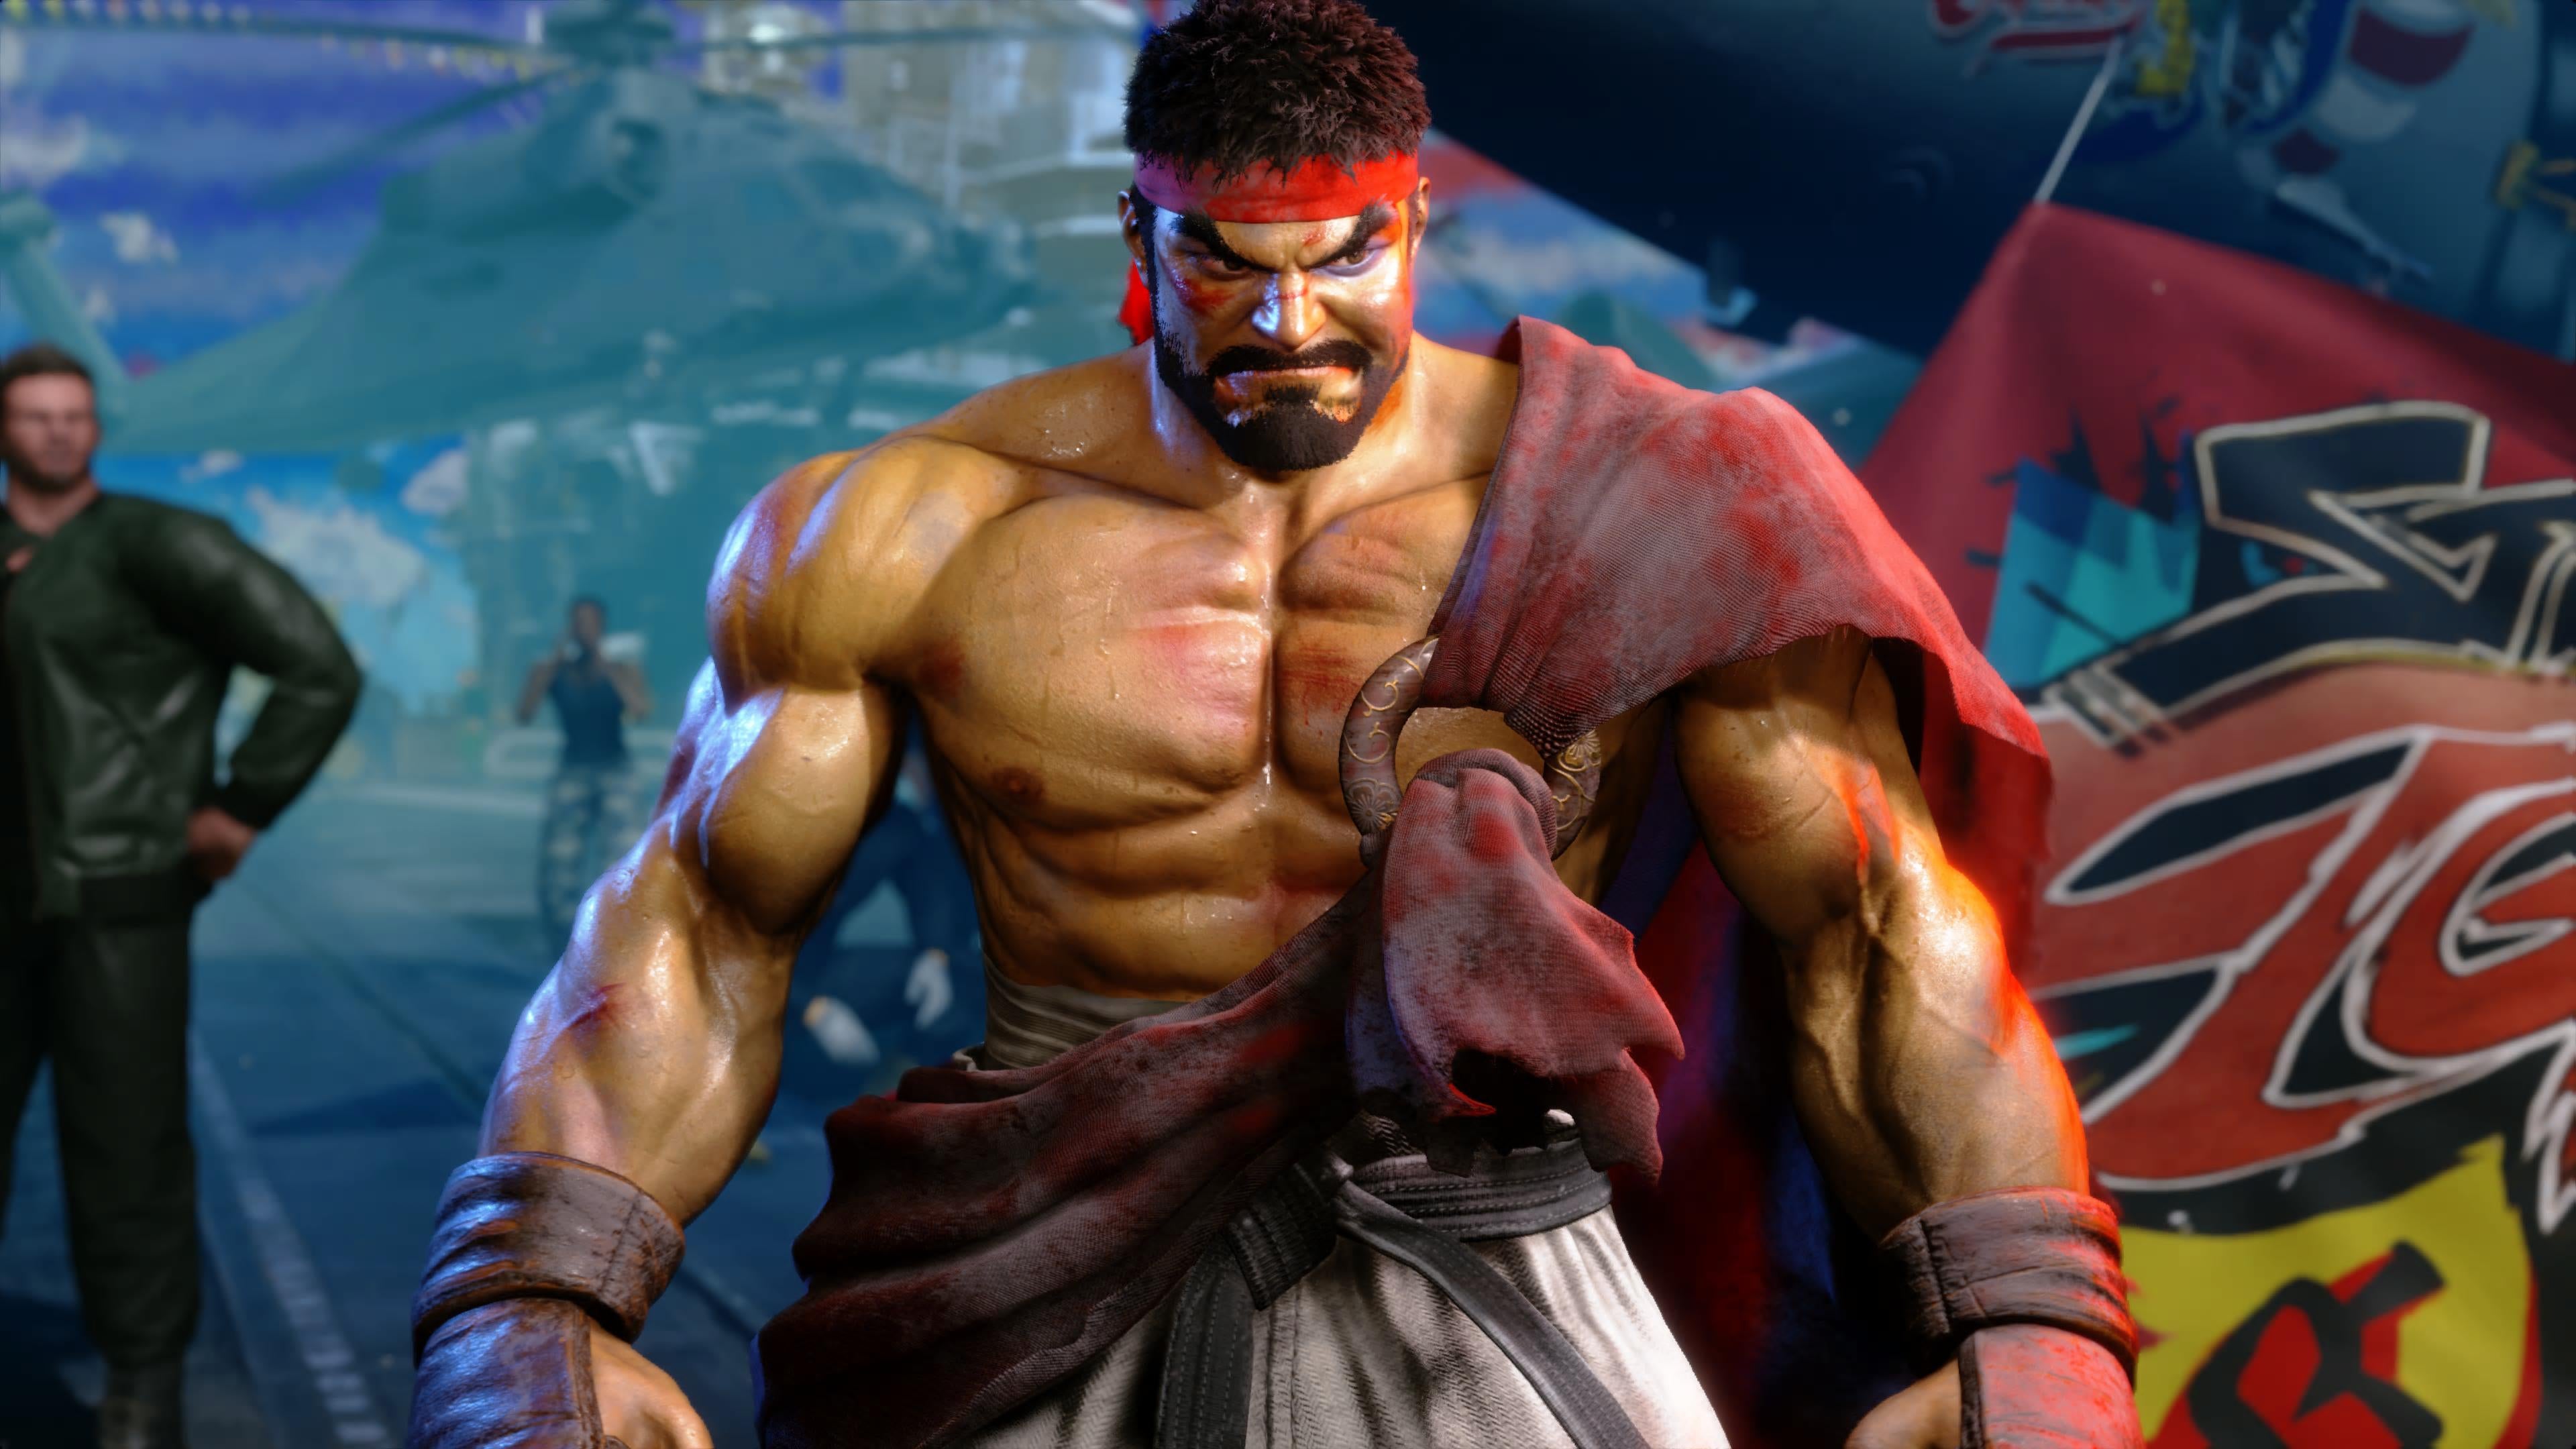 Ryu Street Fighter 6 Complete Guide - Moves, Backstory & Pro Play